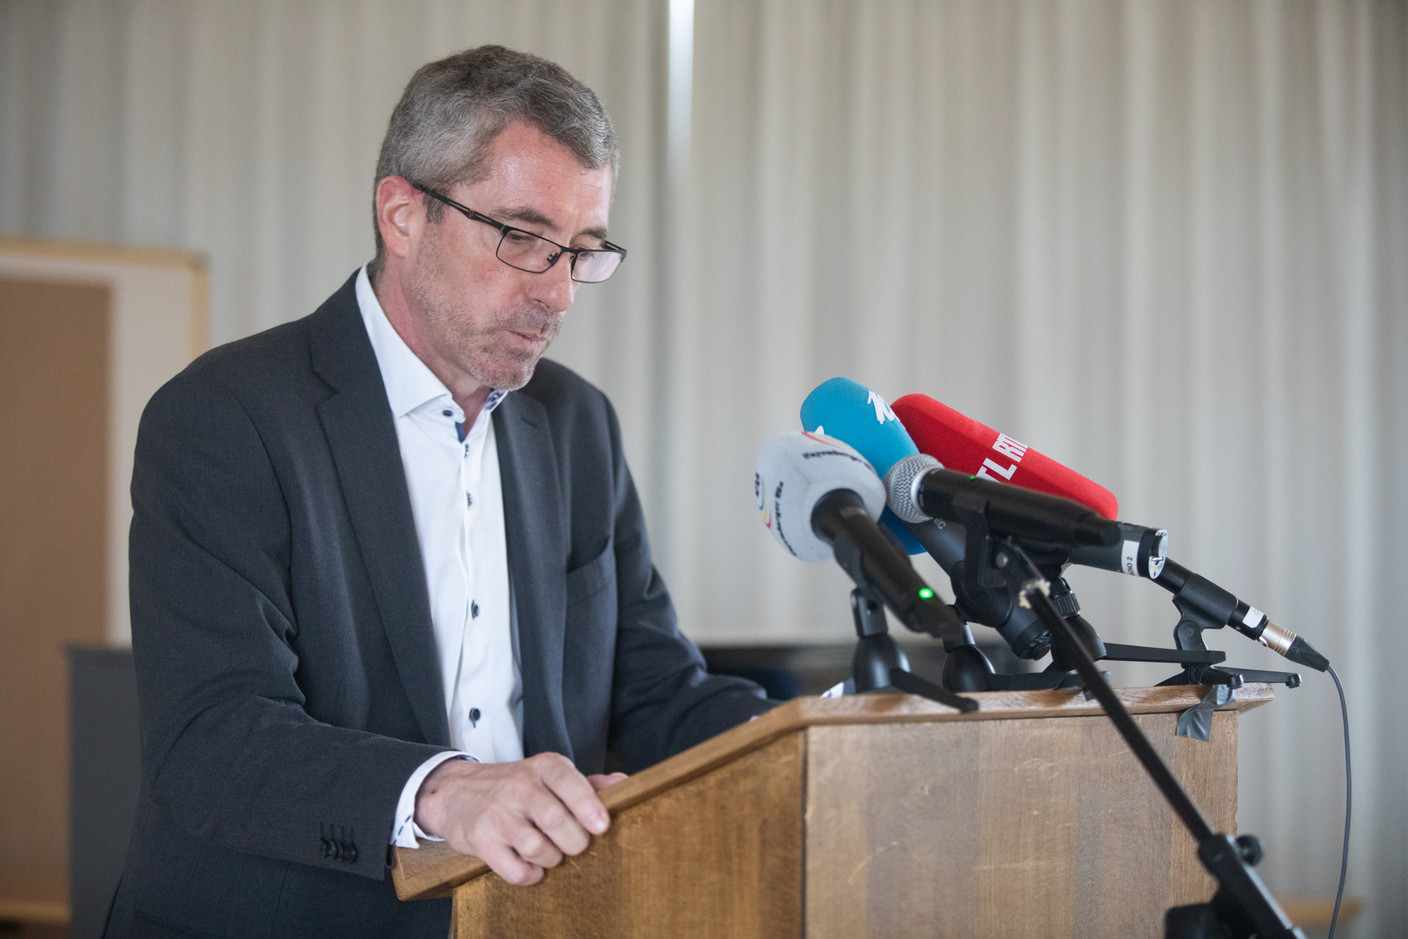 Frank Engel, pictured during a press conference announcing his resignation in March 2021 Library photo: Matic Zorman / Maison Moderne